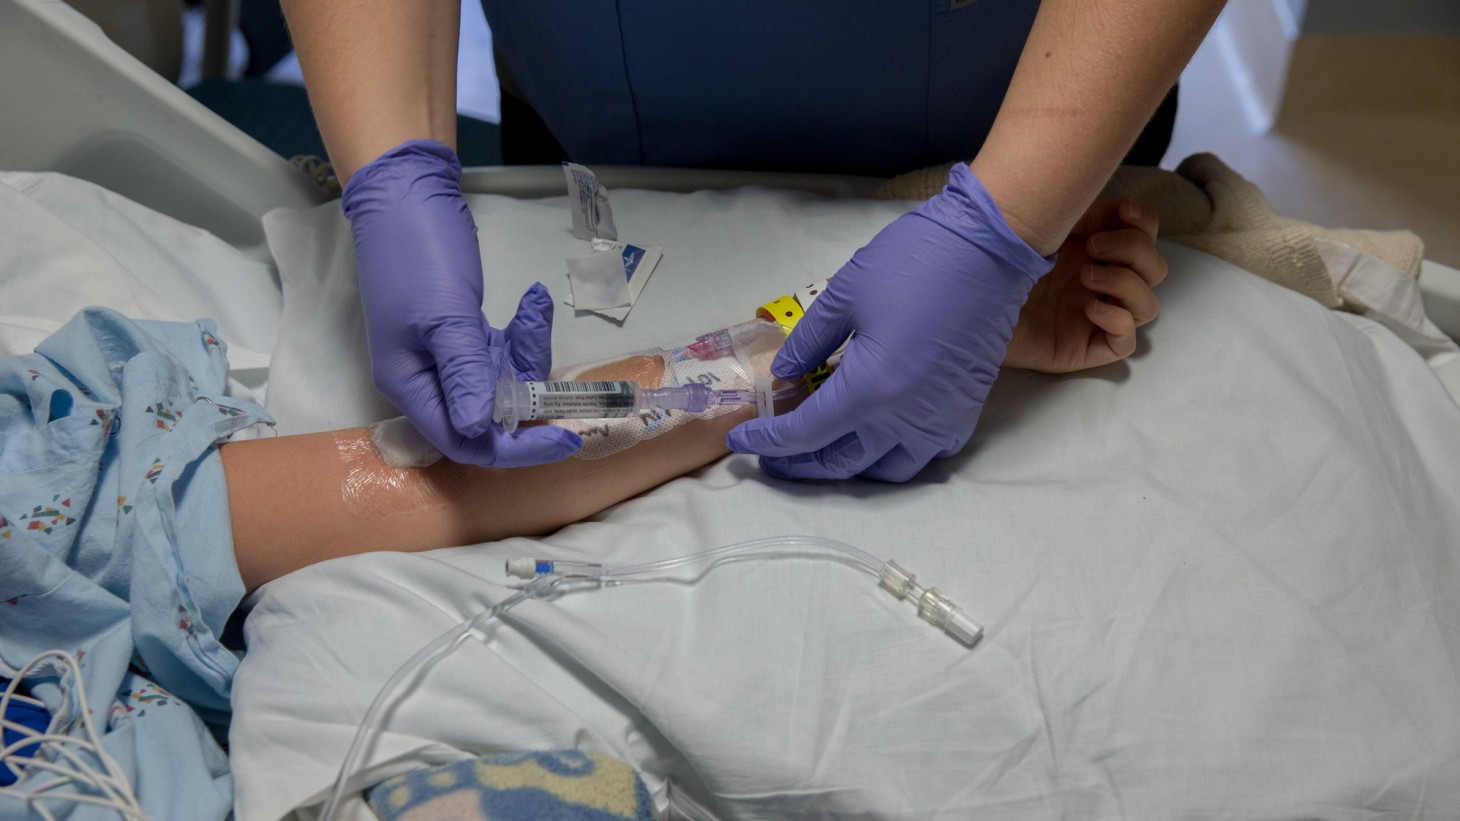 A pair of hands inserting an IV in a patient's arm